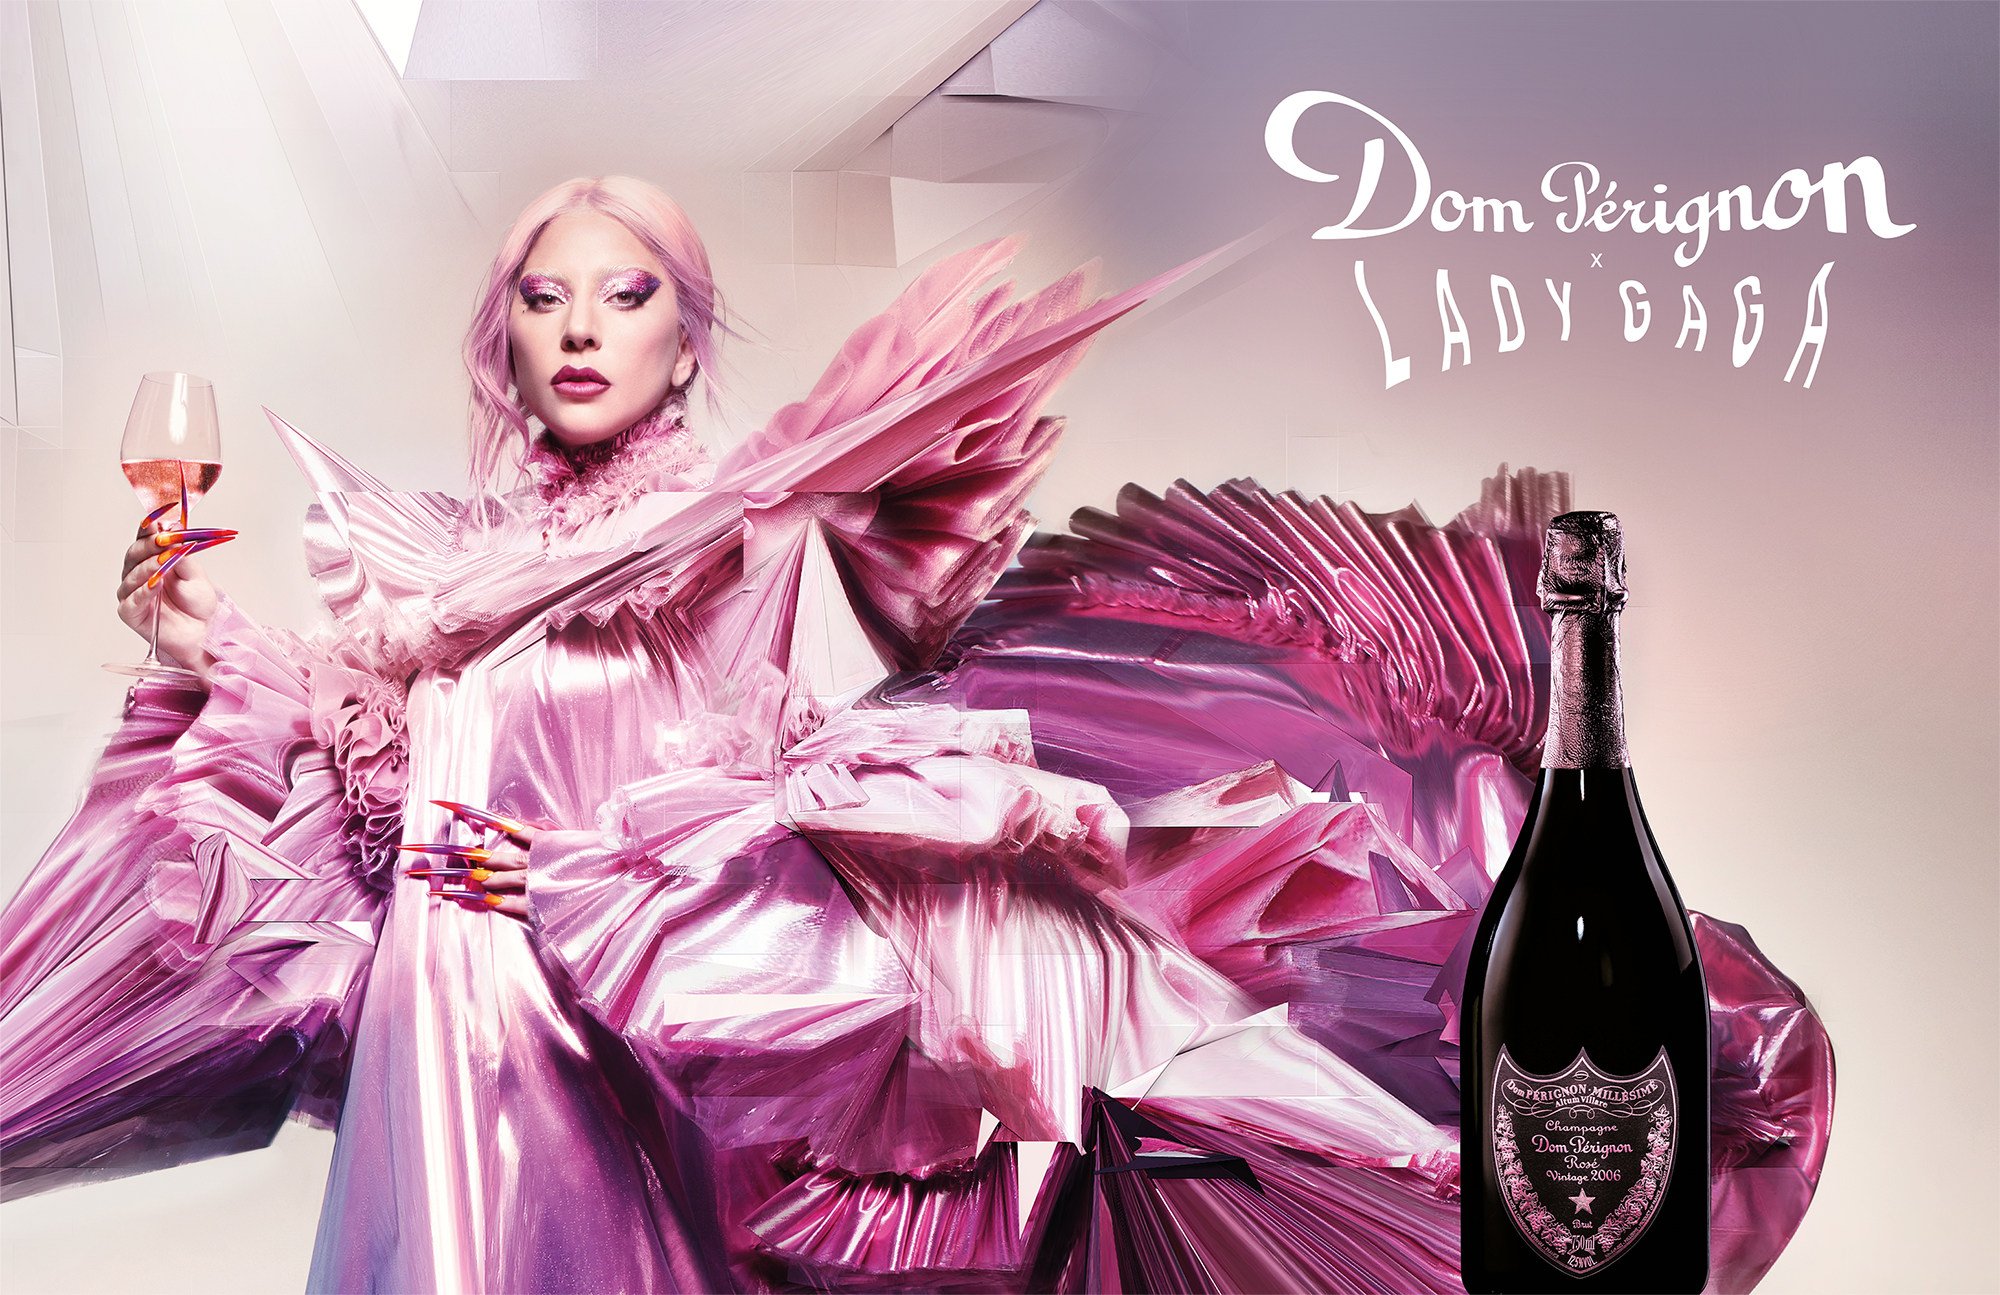 Dom Pérignon and Lady Gaga’s limited edition champagne is the perfect gift for any Little Monsters in your life. Photos: Handout